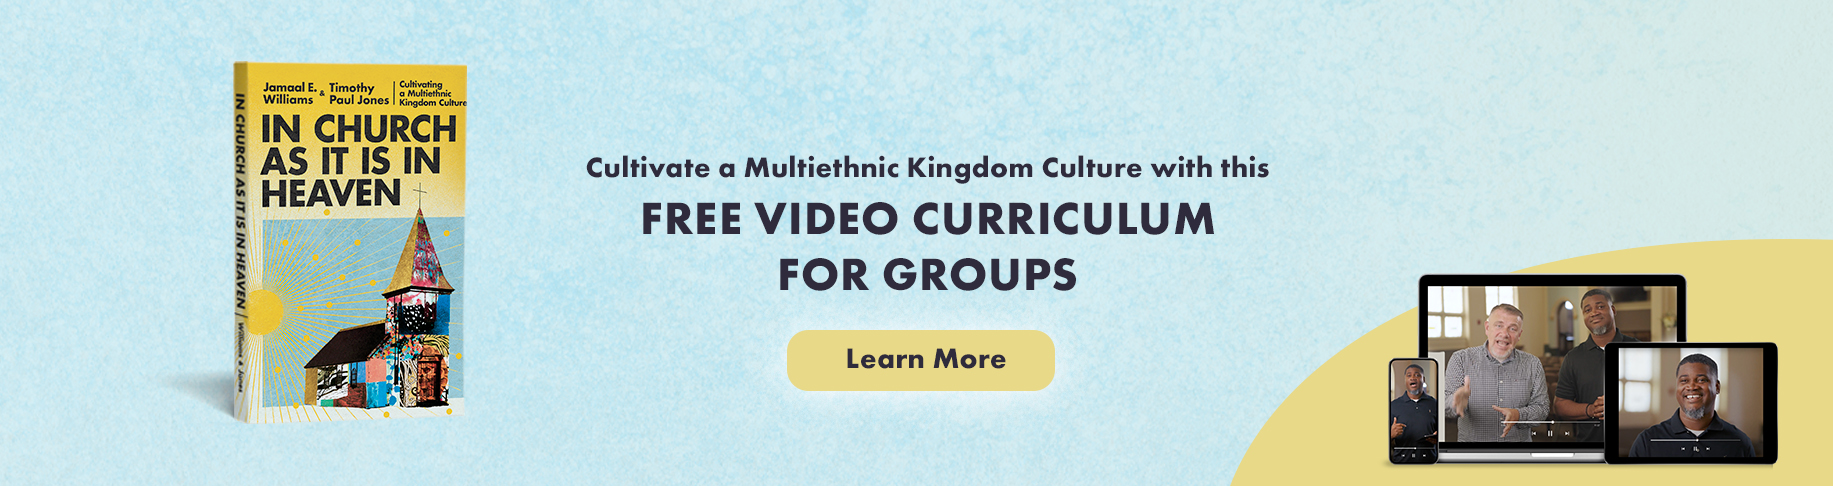 Cultivate a Multiethnic Kingdom Culture with this Free Video Curriculum for Groups - Learn More